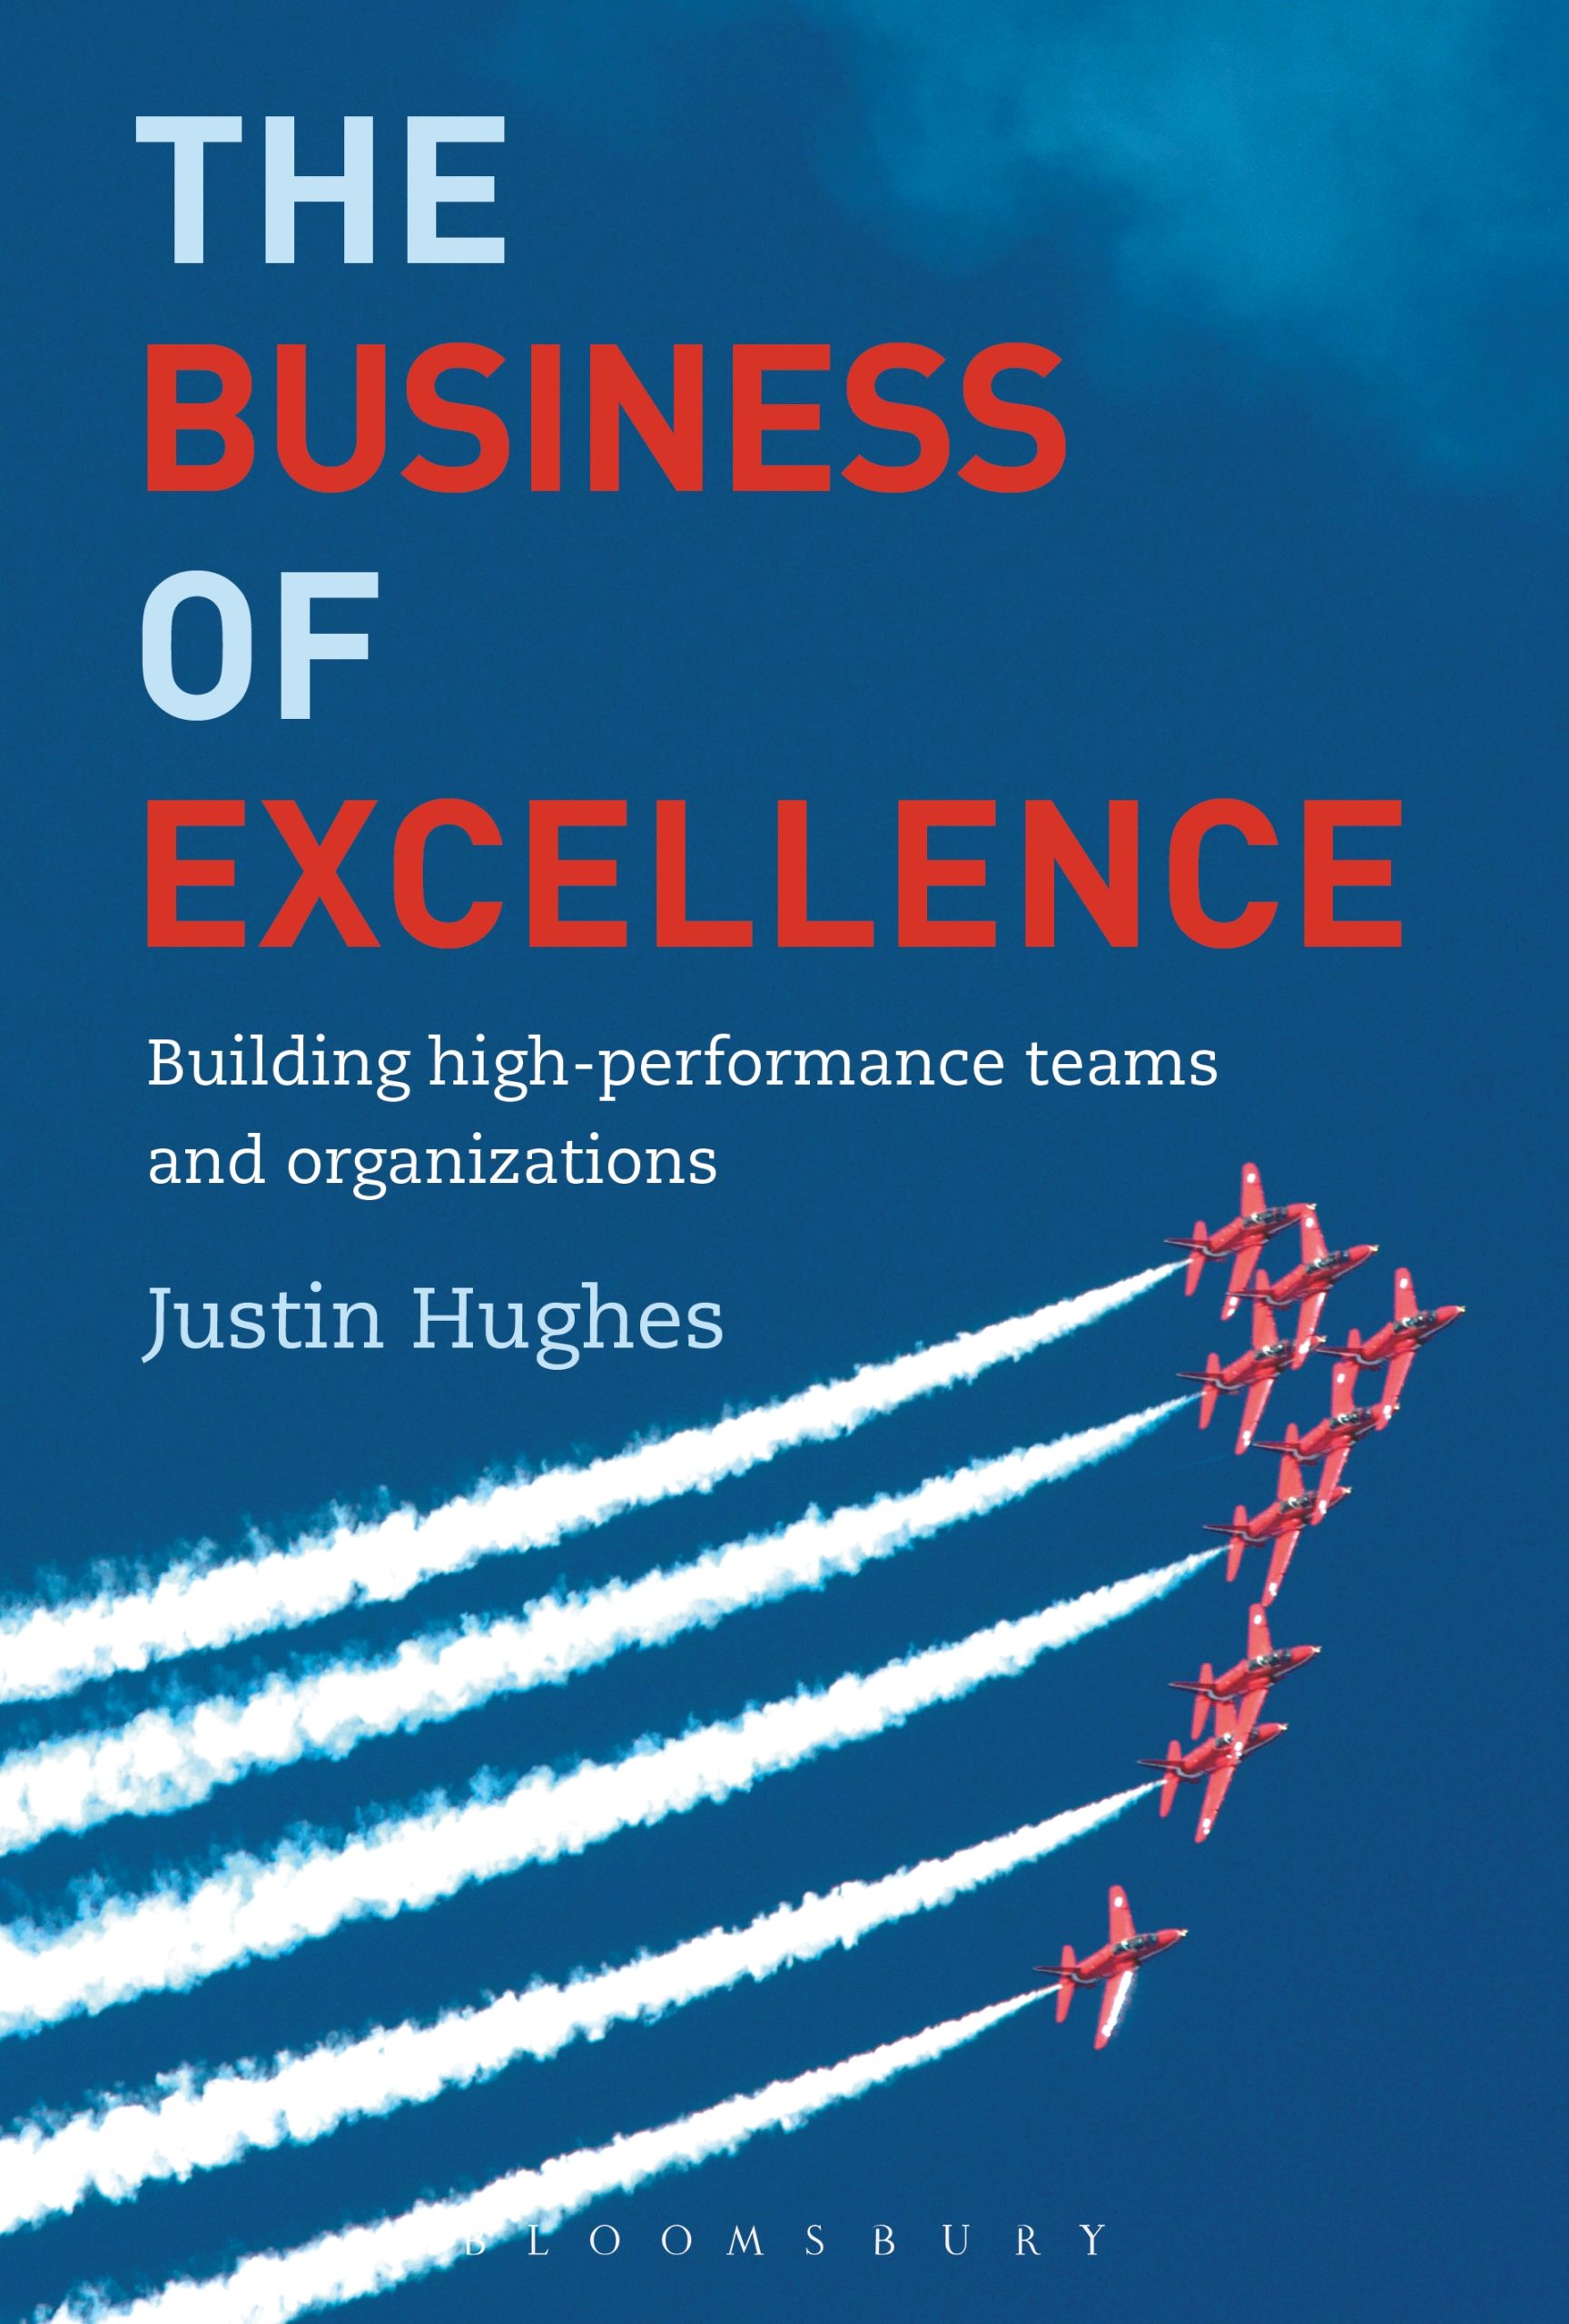 The Business of Excellence: Building high-performance teams and organizations